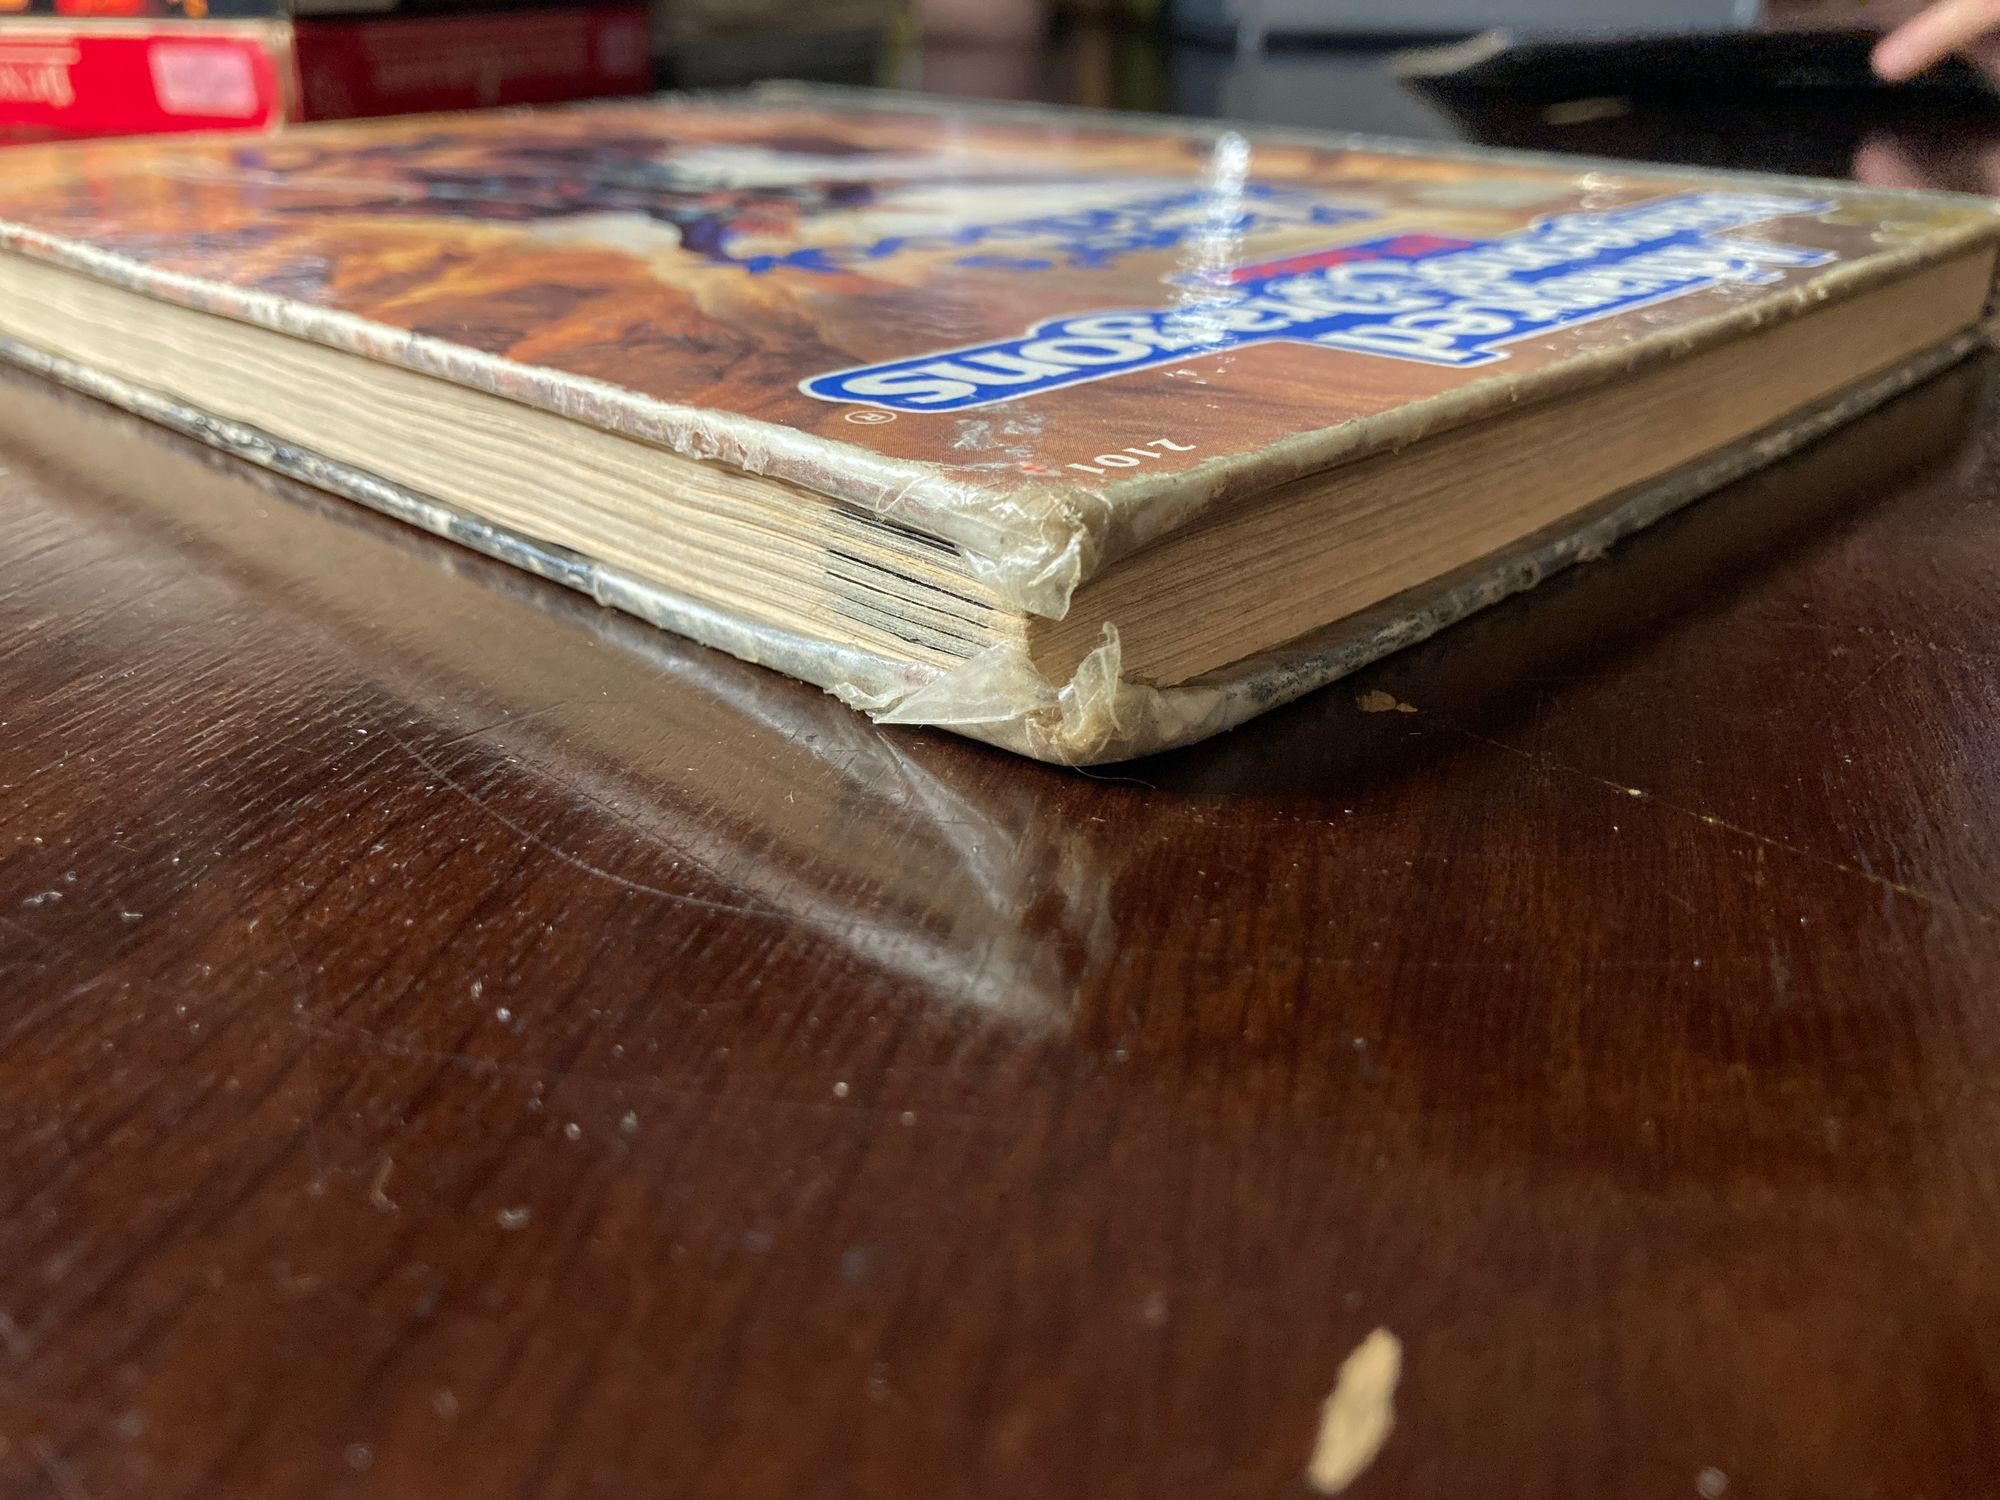 Corner of a book, the corner is raggedy and coversealed.